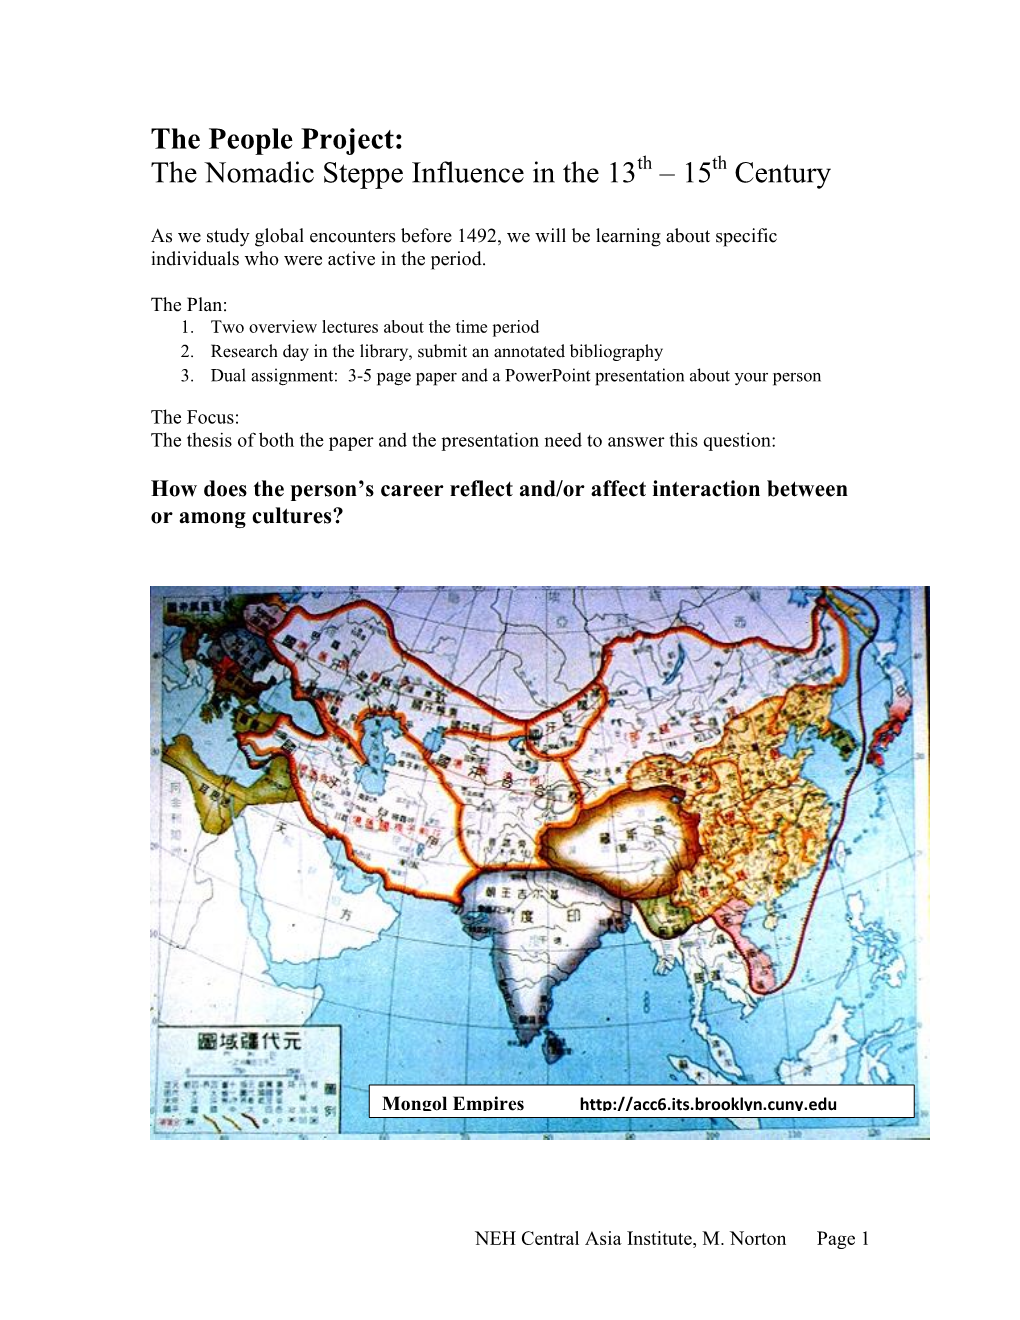 The People Project: the Nomadic Steppe Influence in the 13 Th – 15Th